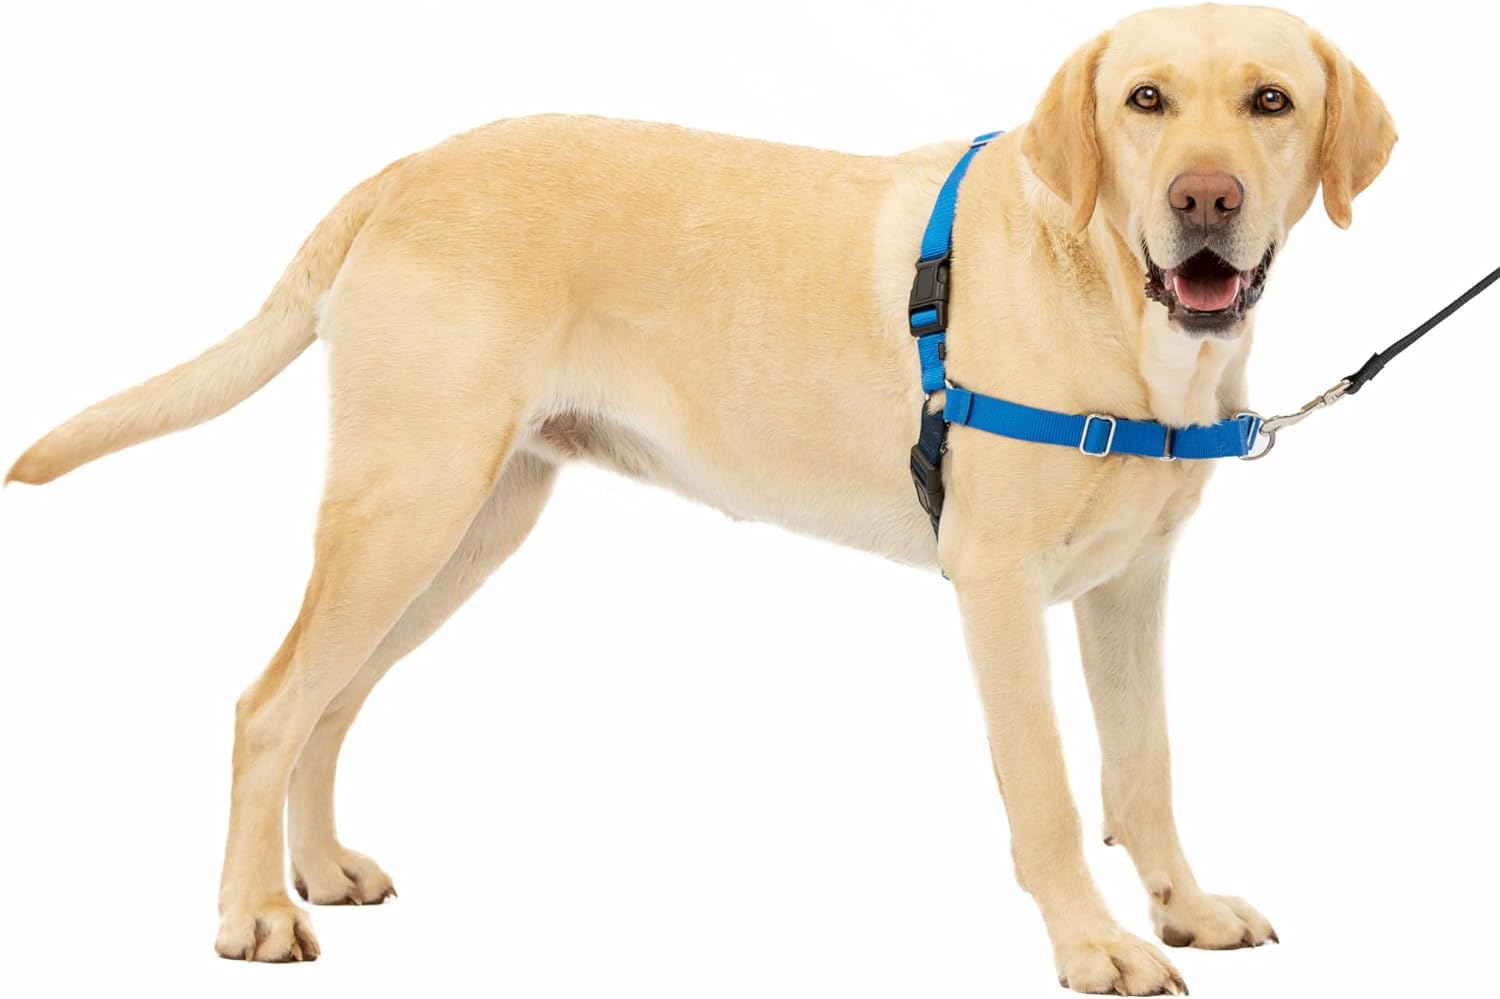 PetSafe Easy Walk No-Pull Dog Harness - The Ultimate Harness to Help Stop Pulling - Take Control  Teach Better Leash Manners - Helps Prevent Pets Pulling on Walks - Medium, Apple Green/Gray